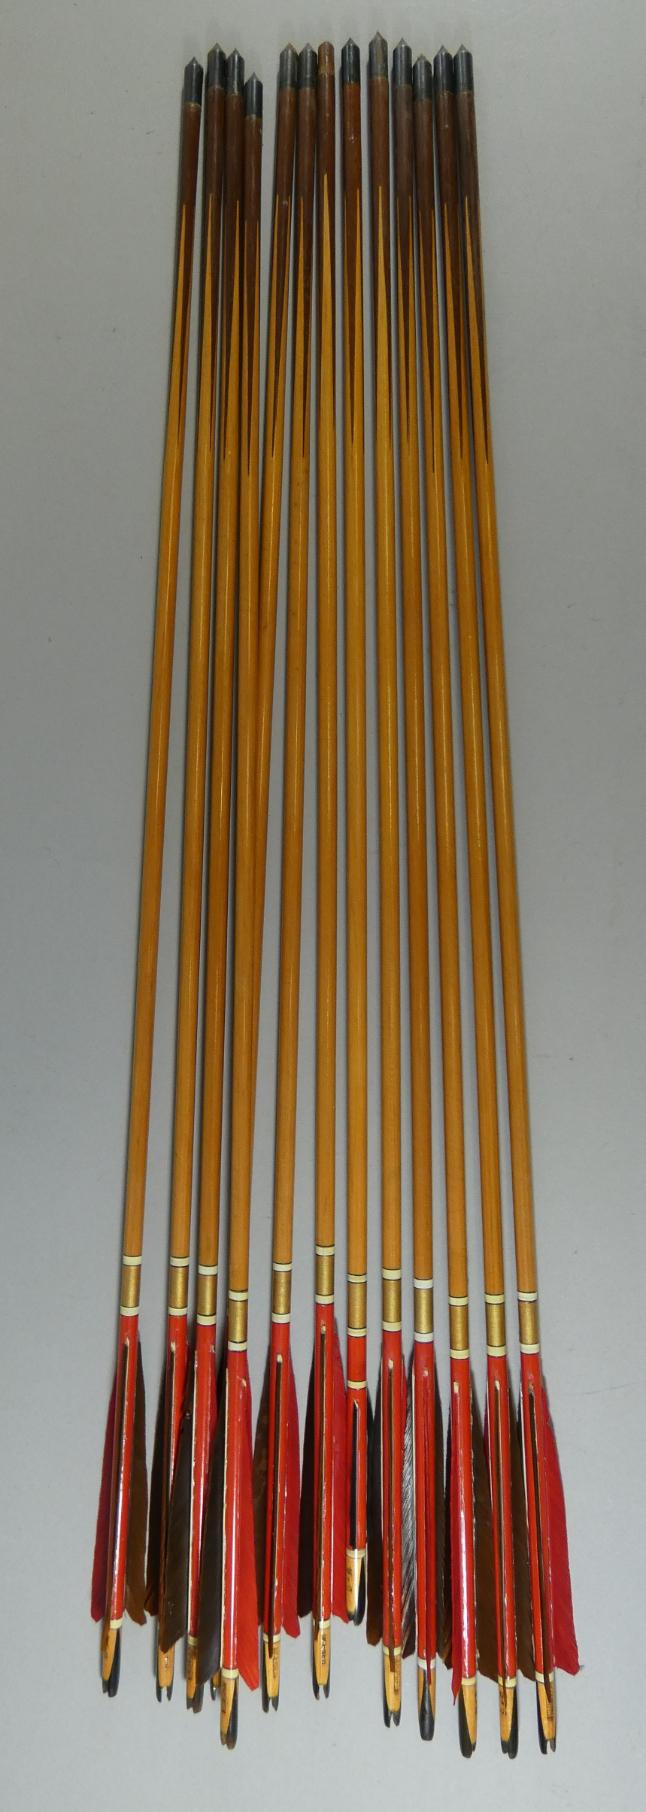 THIRTEEN ARROWS BY EDWARD MCEWEN, 20TH CENTURY AND A LARGE QUANTITY OF TARGET SHOOTING ARROWS